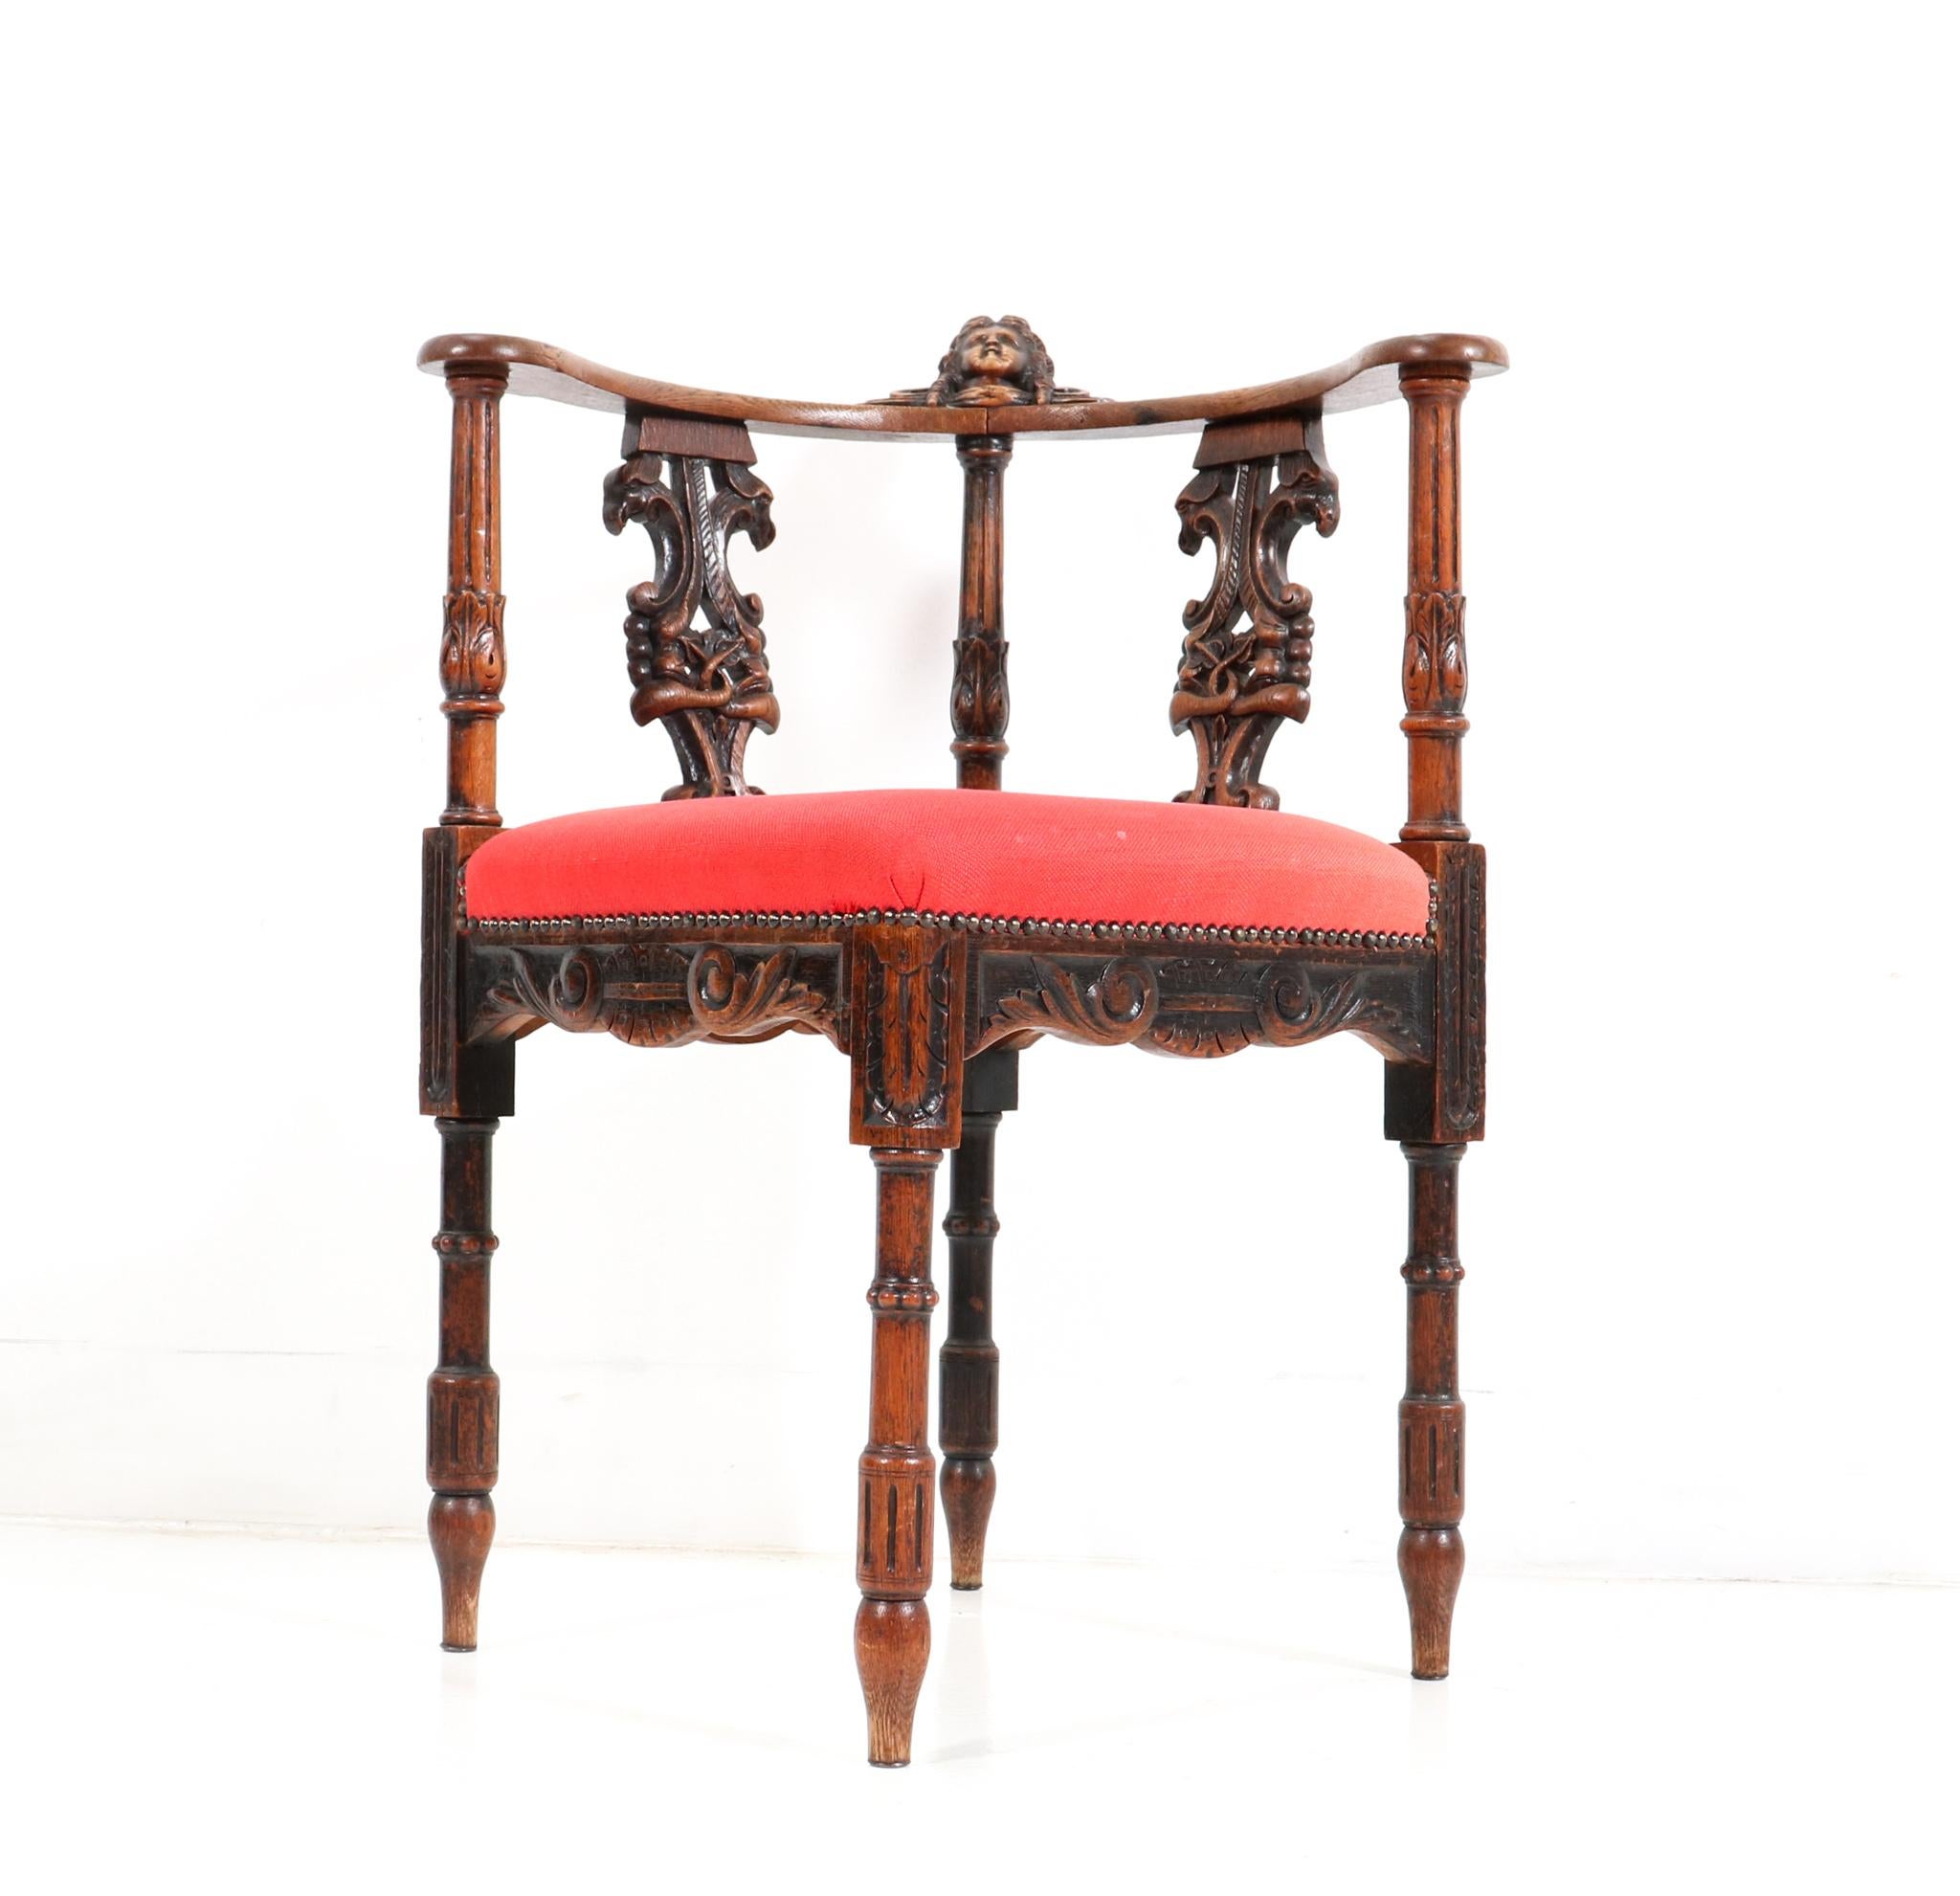 Stunning and rare Renaissance Revival corner armchair.
Striking French design from the 1890s.
Solid oak frame with original hand-carved decorative elements.
Original hand-carved female head at the back of the armrests.
The seat has been